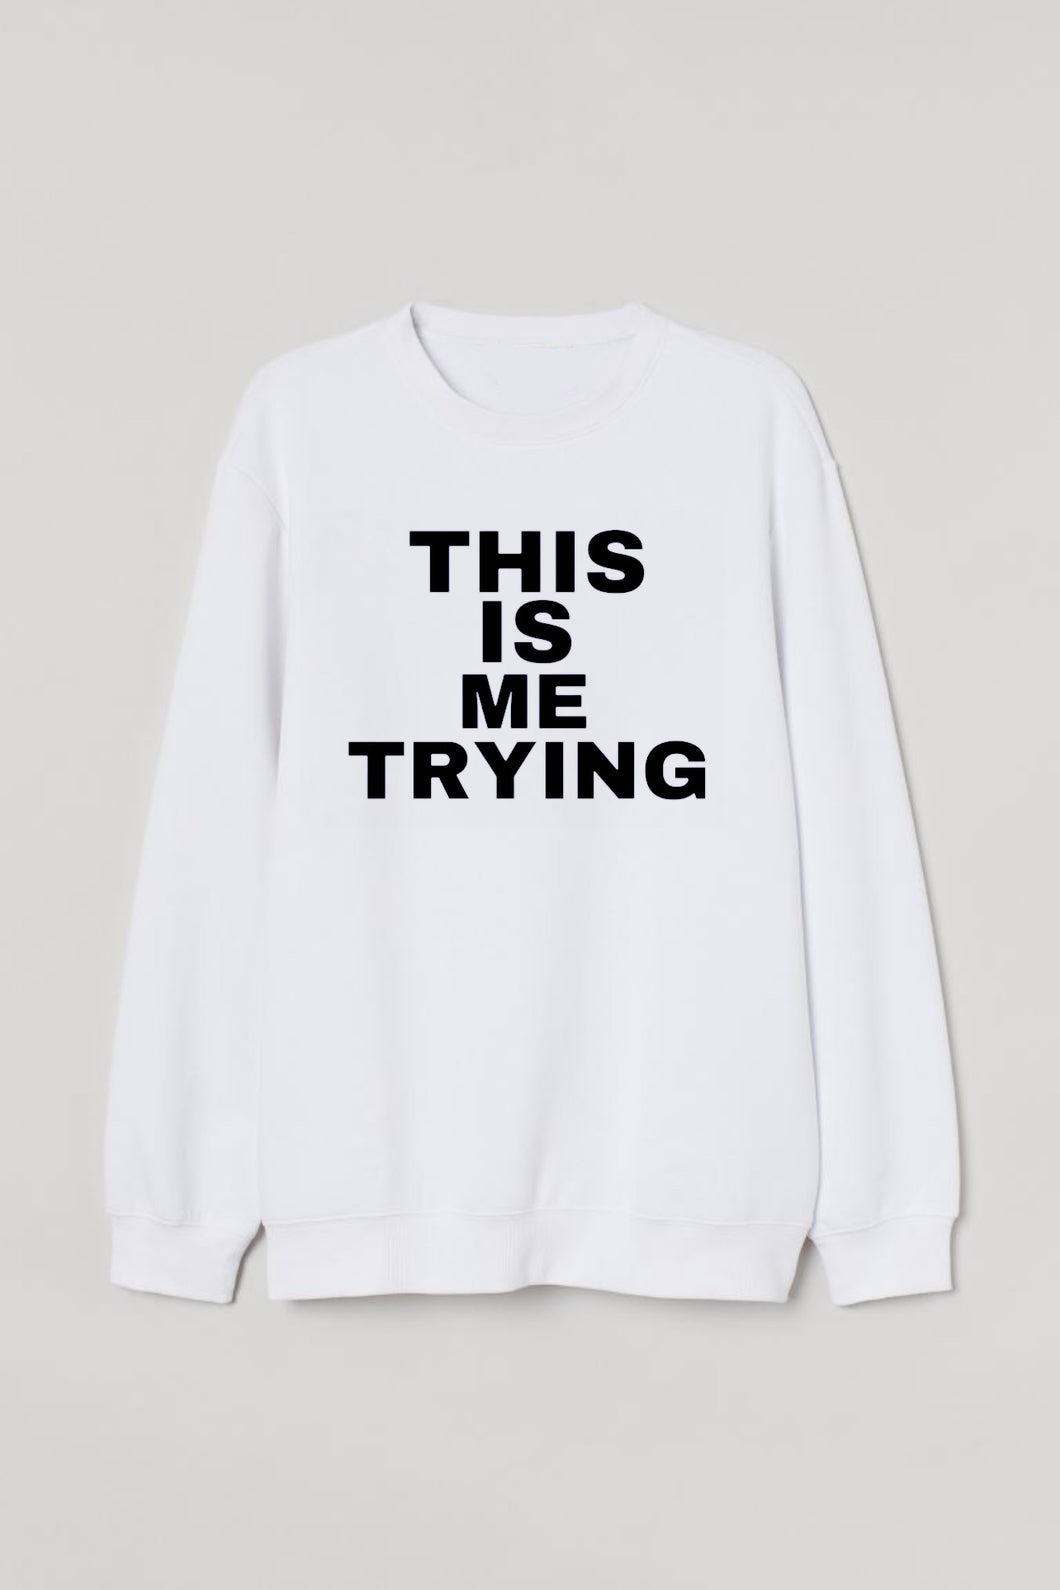 This is Me Trying Crew Neck - white